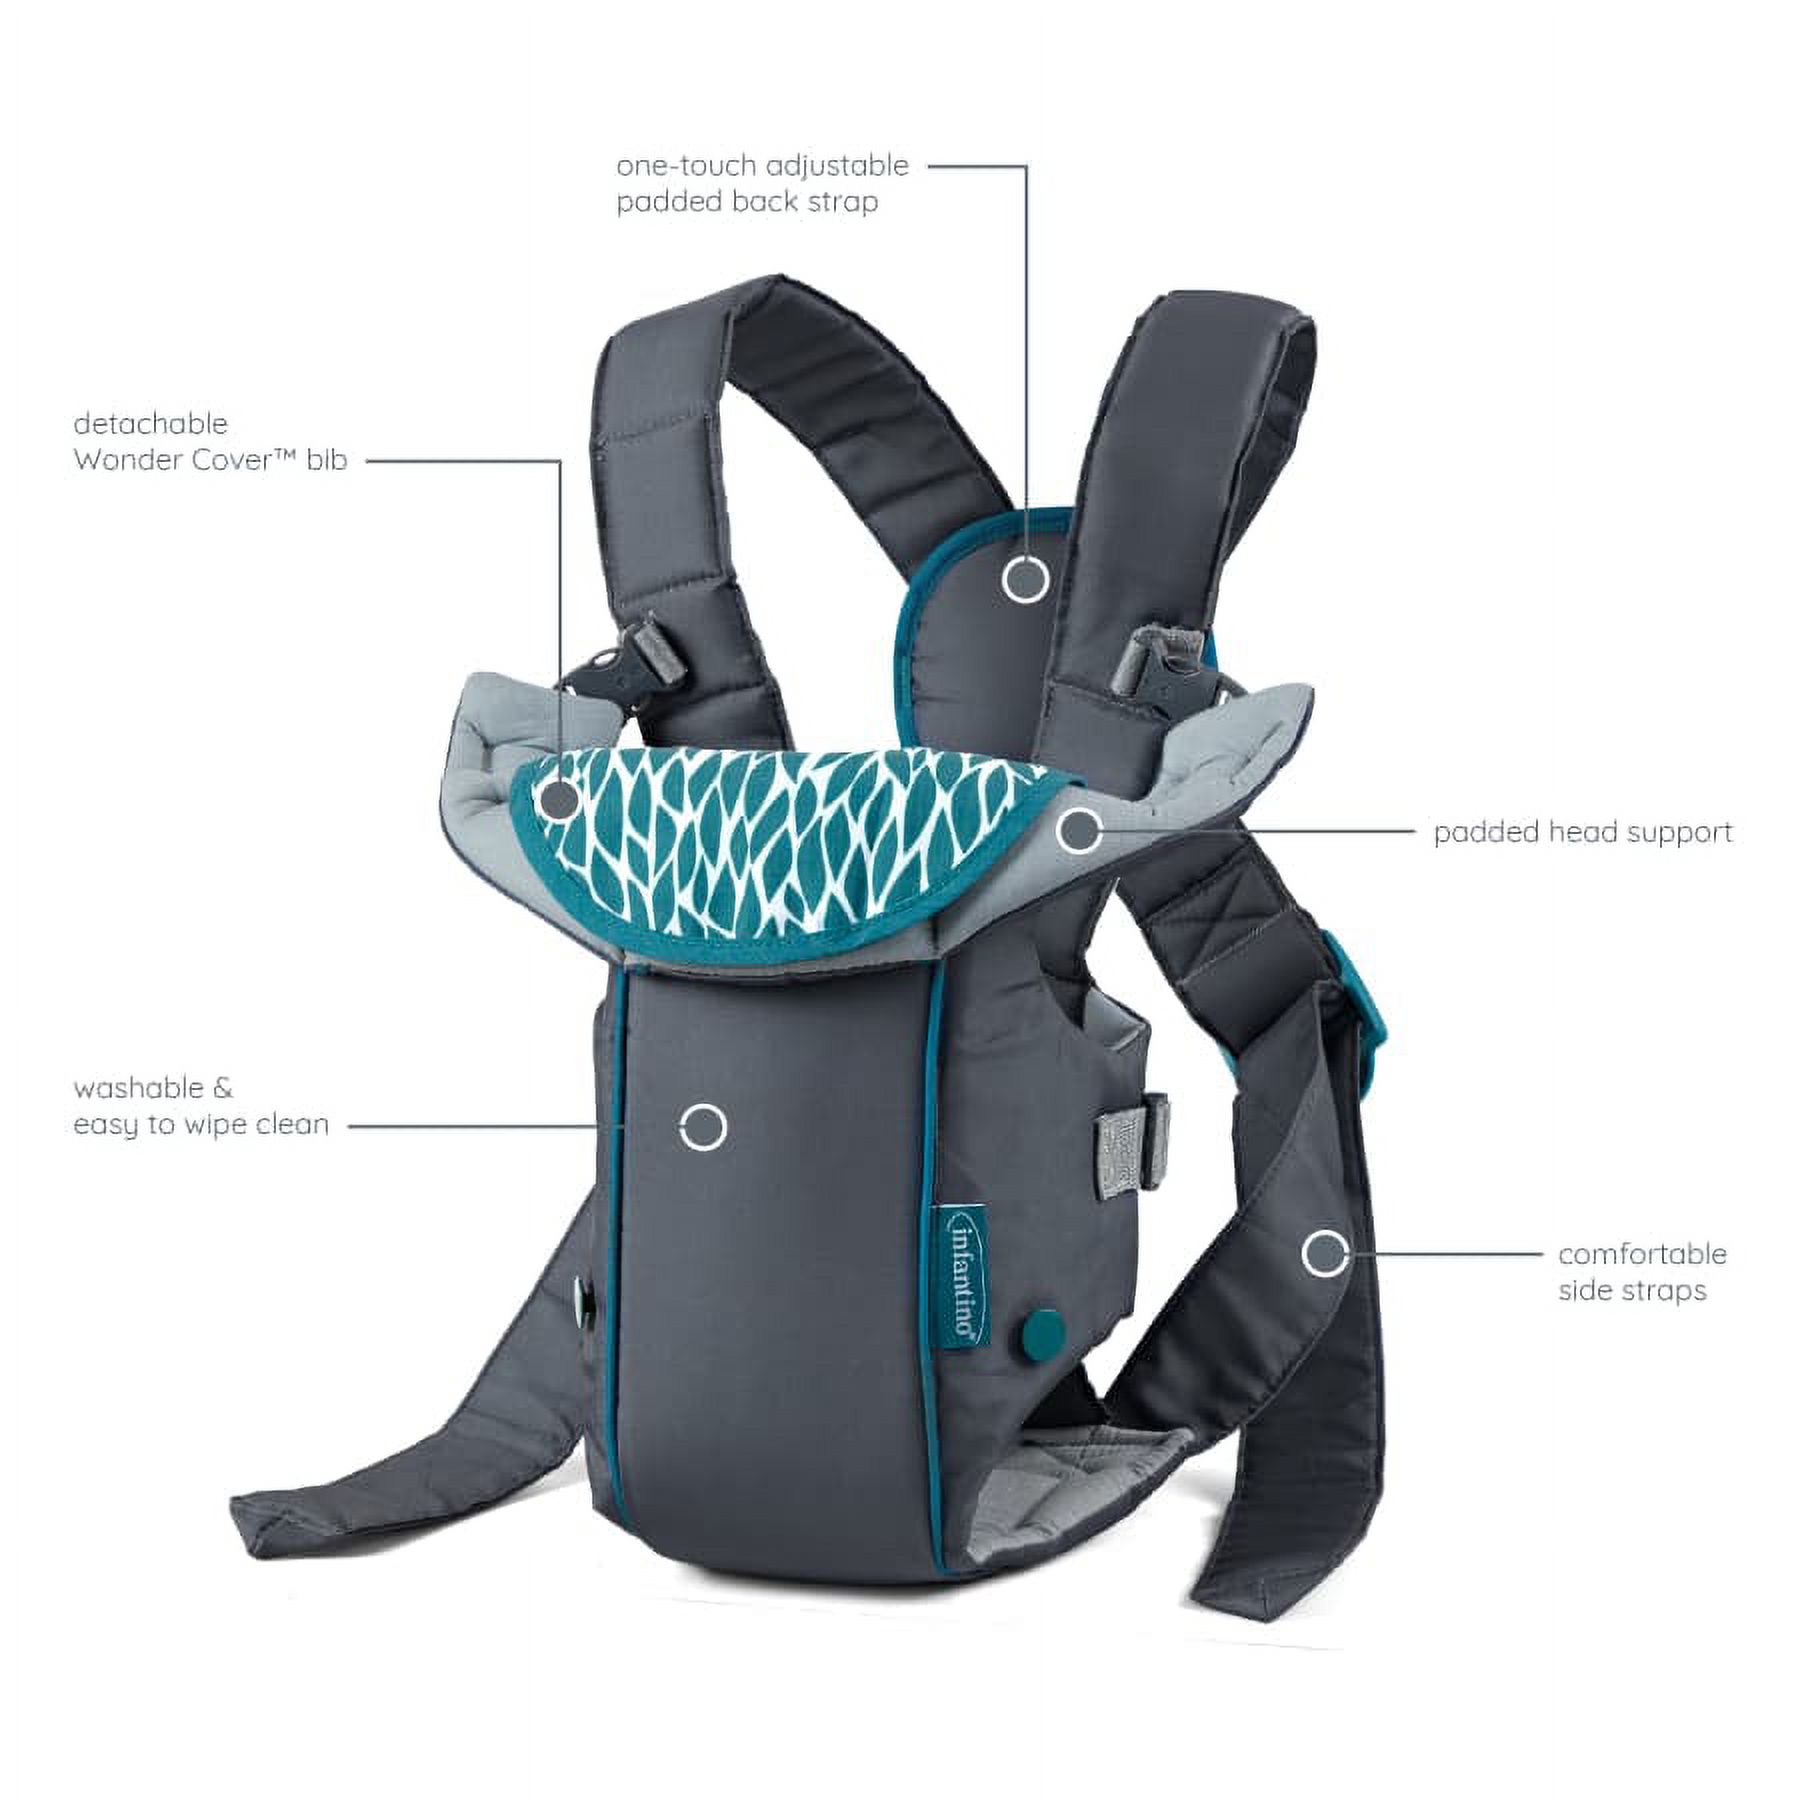 Infantino Swift Classic Baby Carrier with Wonder Cover Bib, 2-Position, 7-26lb, Gray - image 5 of 6